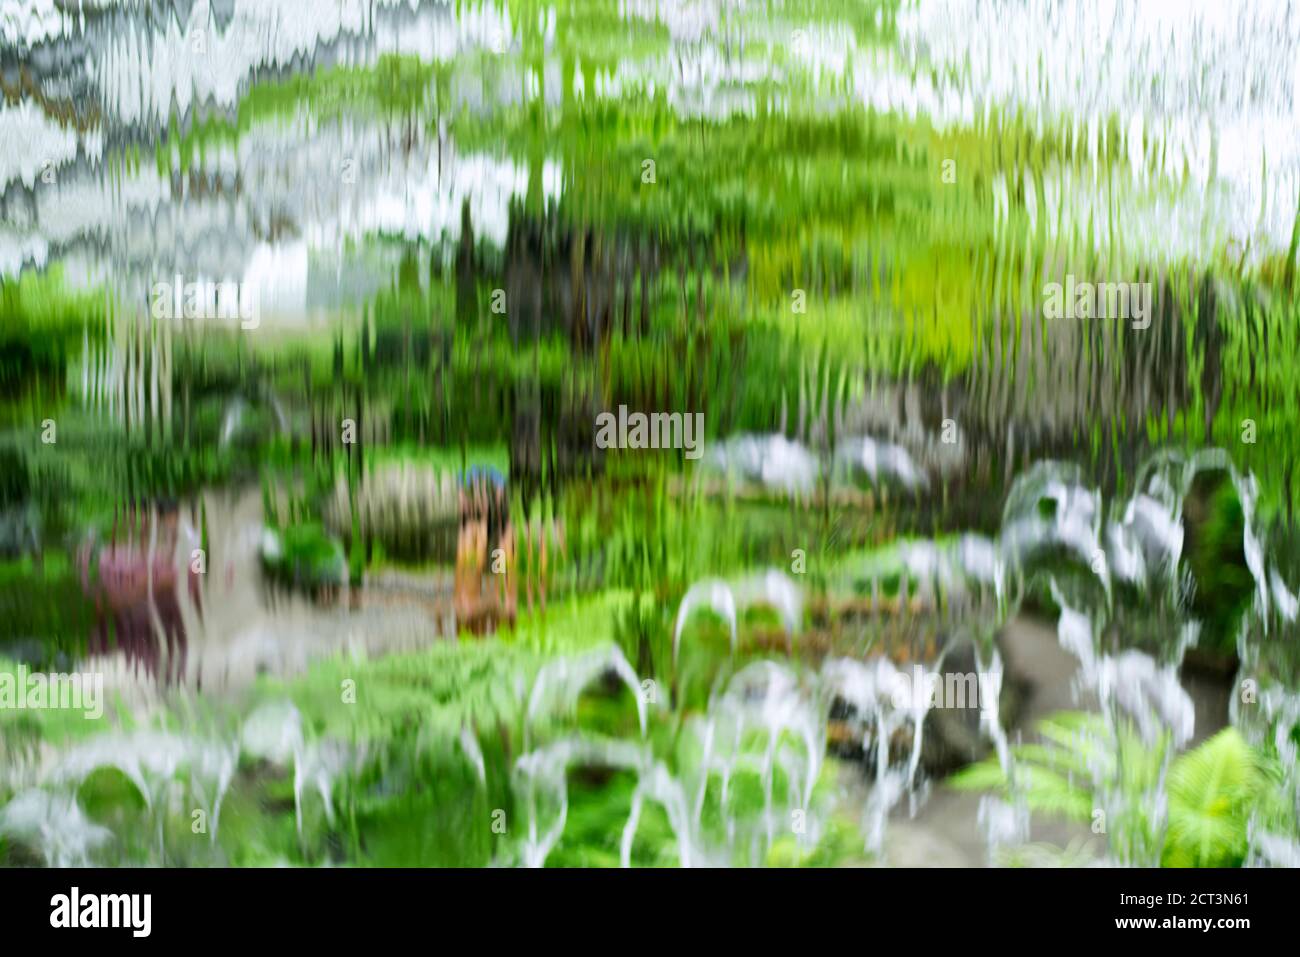 An abstract blurred motion waterfall background seeing the inside of a tropical greenhouse in montreal canada. Stock Photo